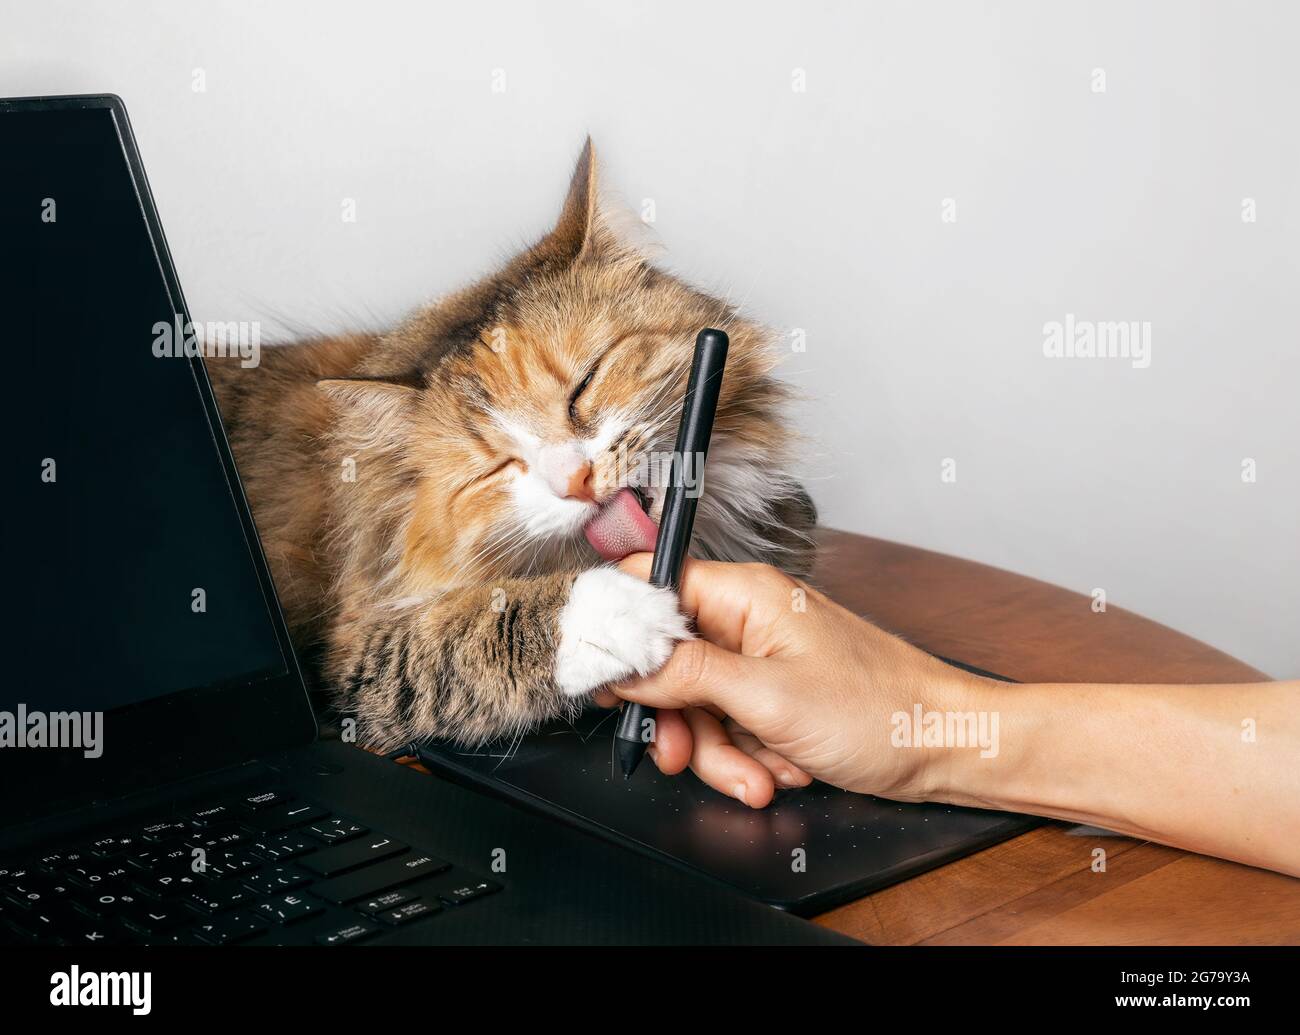 Cute cat licking hand working on a computer with a tablet pen. Torbie kitty lying next to laptop with one paw on owners hand and visible pink tongue. Stock Photo